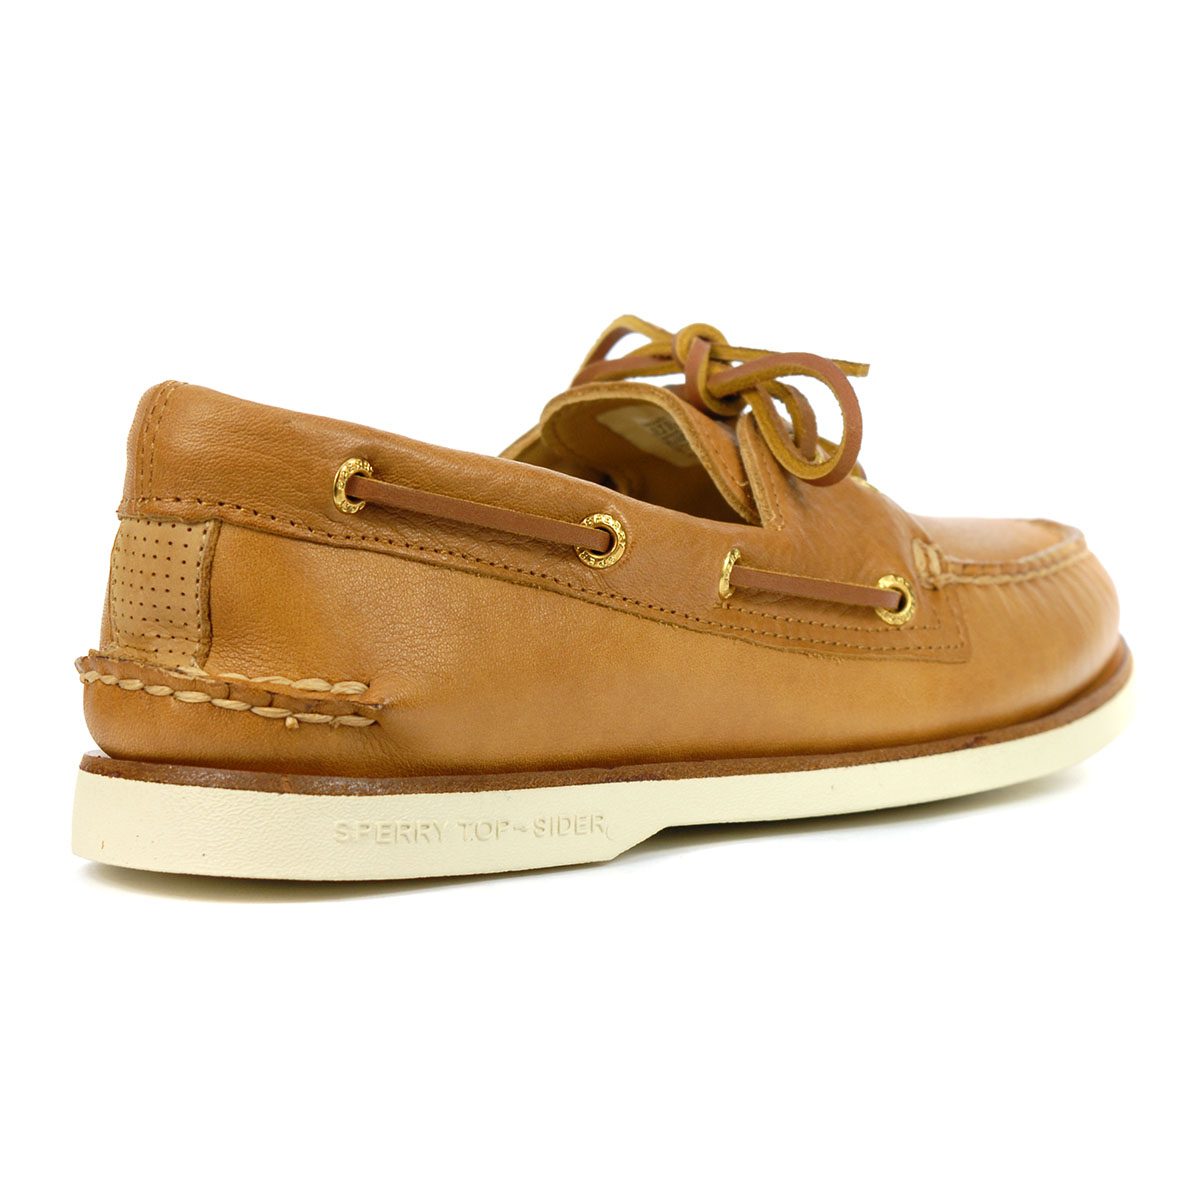 Sperry Top-Sider Men's Gold Cup AO 2-Eye Tan Soft Leather Boat Shoes ...